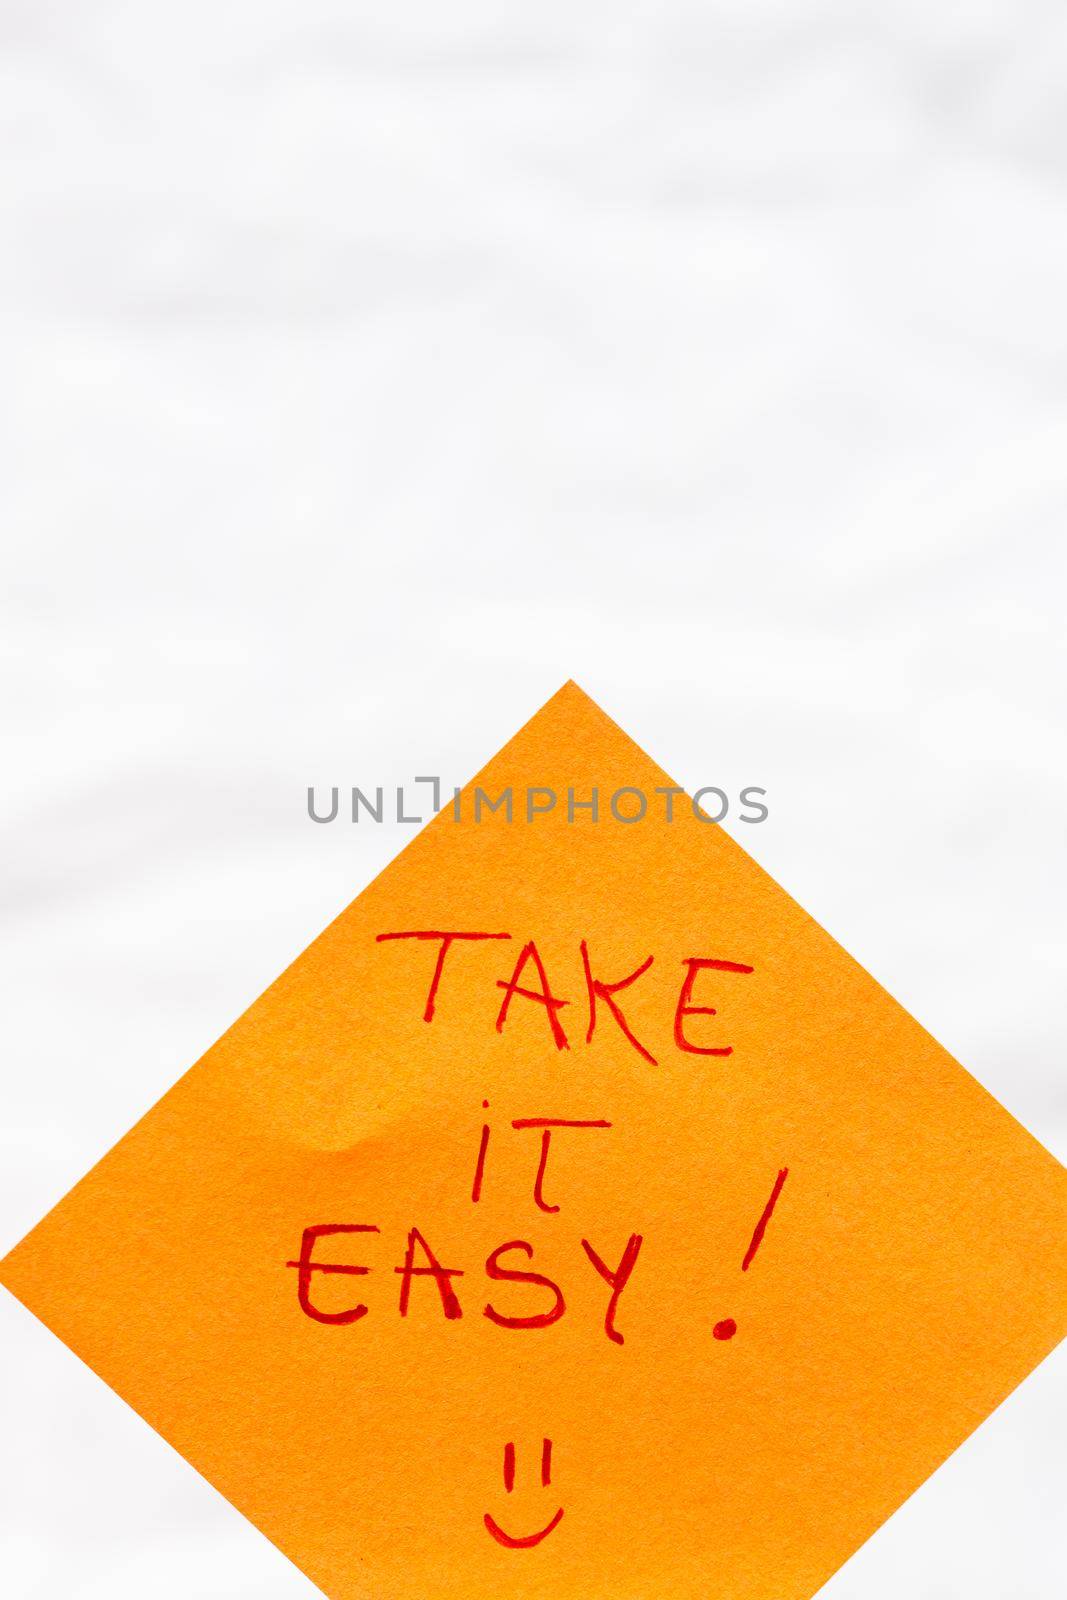  Take it easy handwriting text close up isolated on orange paper with copy space. by vladispas